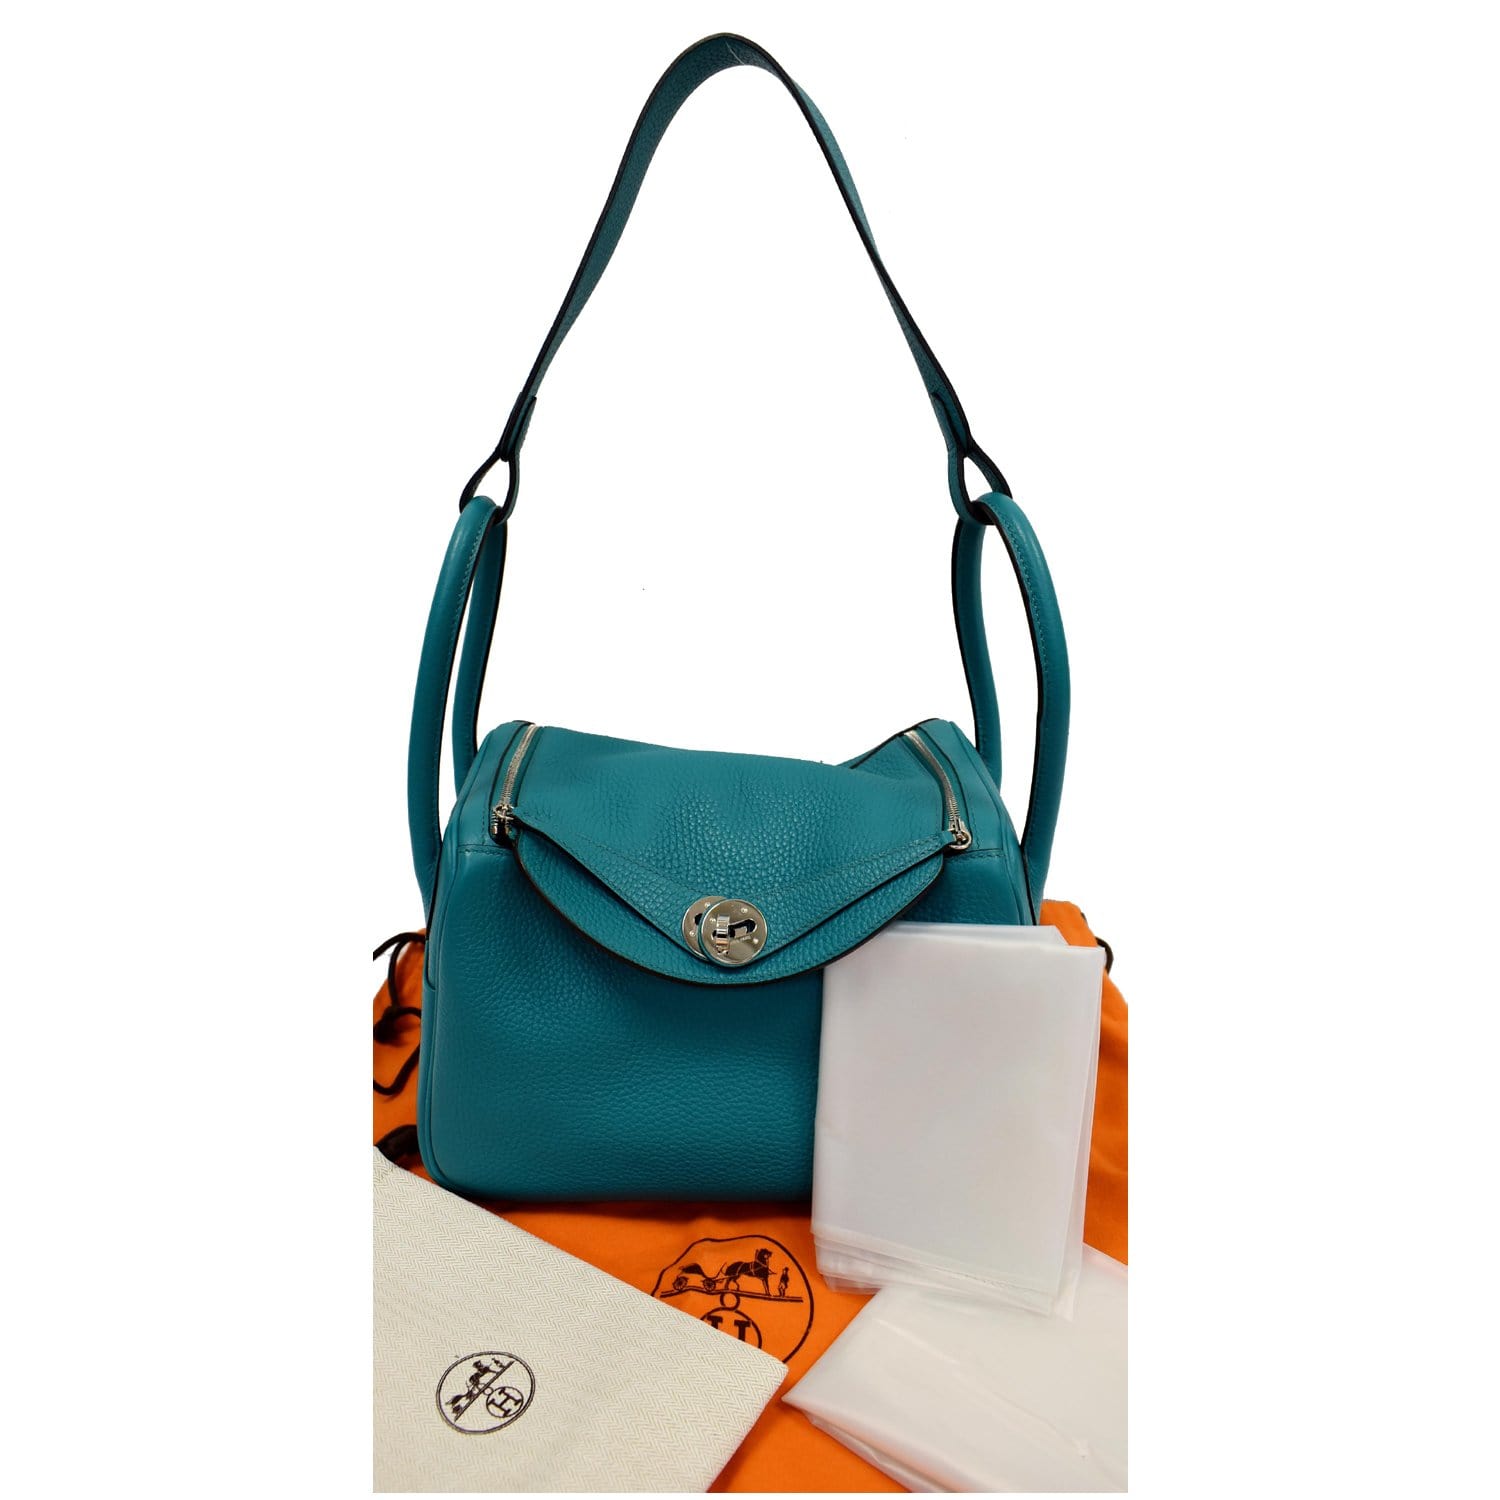 Practically Brand New AUTHENTIC HERMÈS LINDY 30 Handbag In Gorgeous Vert  Jade Leather for Sale in Westport, CT - OfferUp